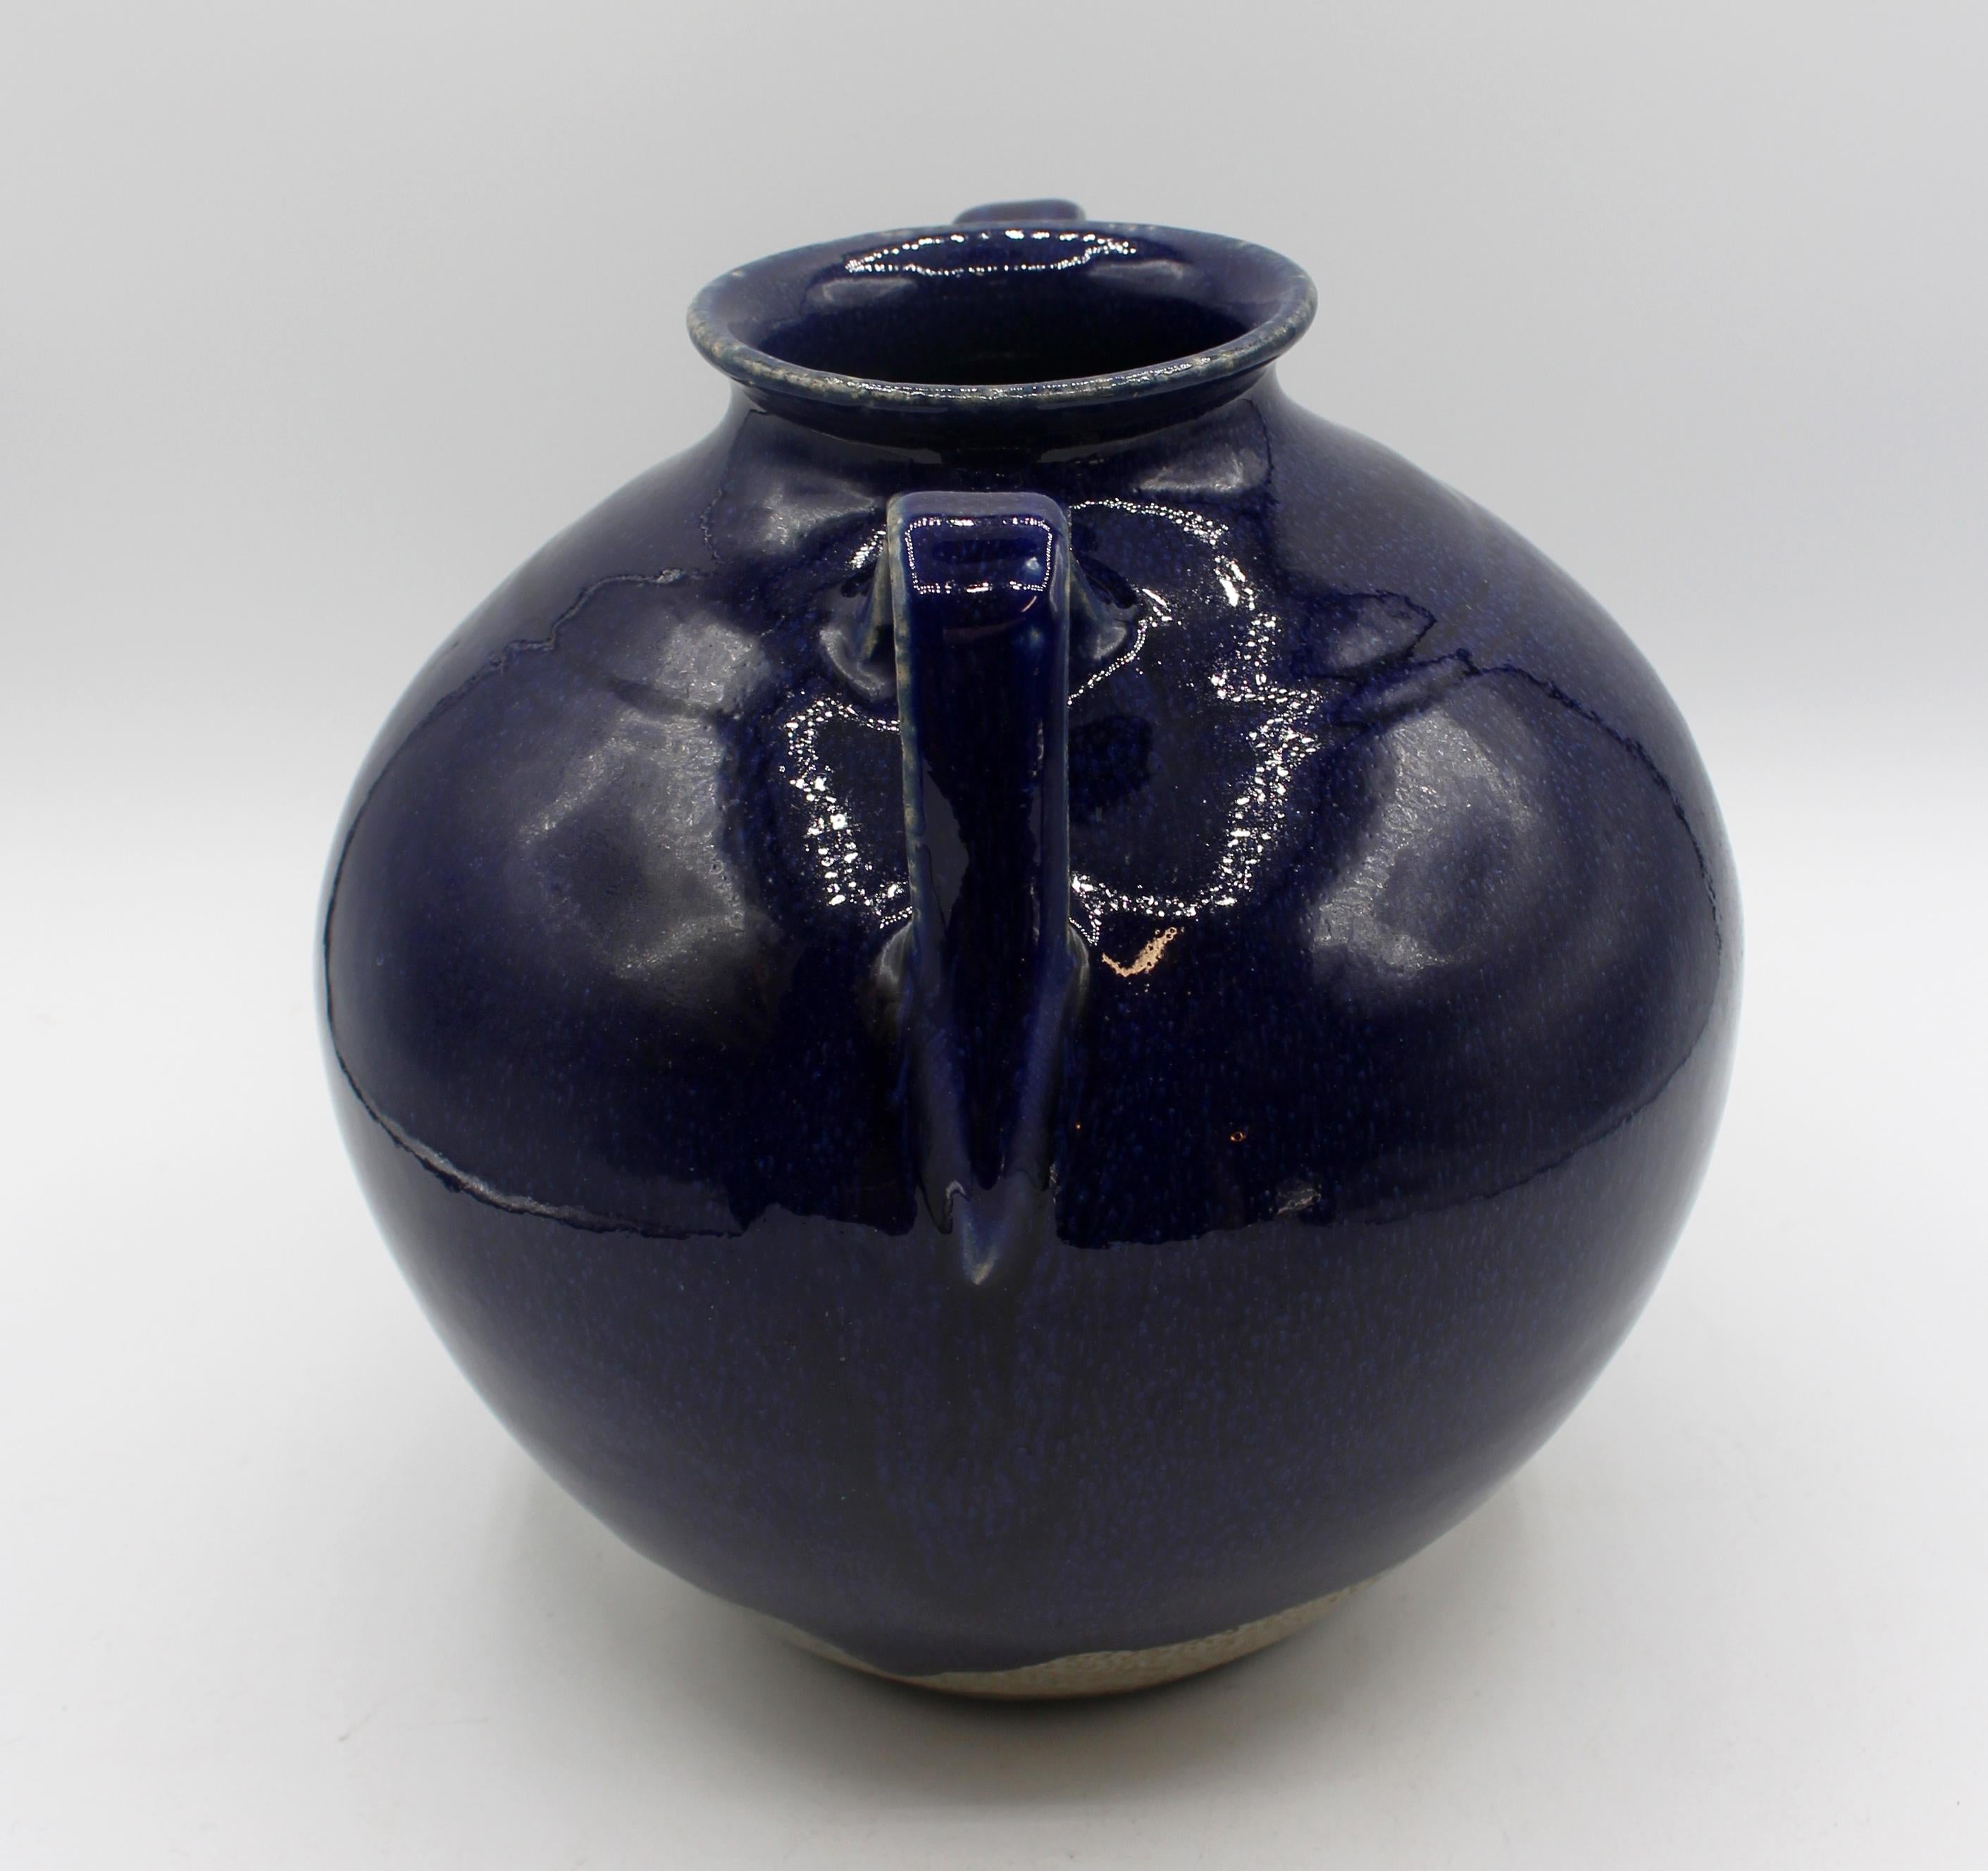 1993 Cobalt blue glazed double loop handled pottery jar or vase by Vernon Owens. Jugtown Ware, Seagrove, NC. The thick cobalt glaze drips down a salt glazed body. 8 3/4